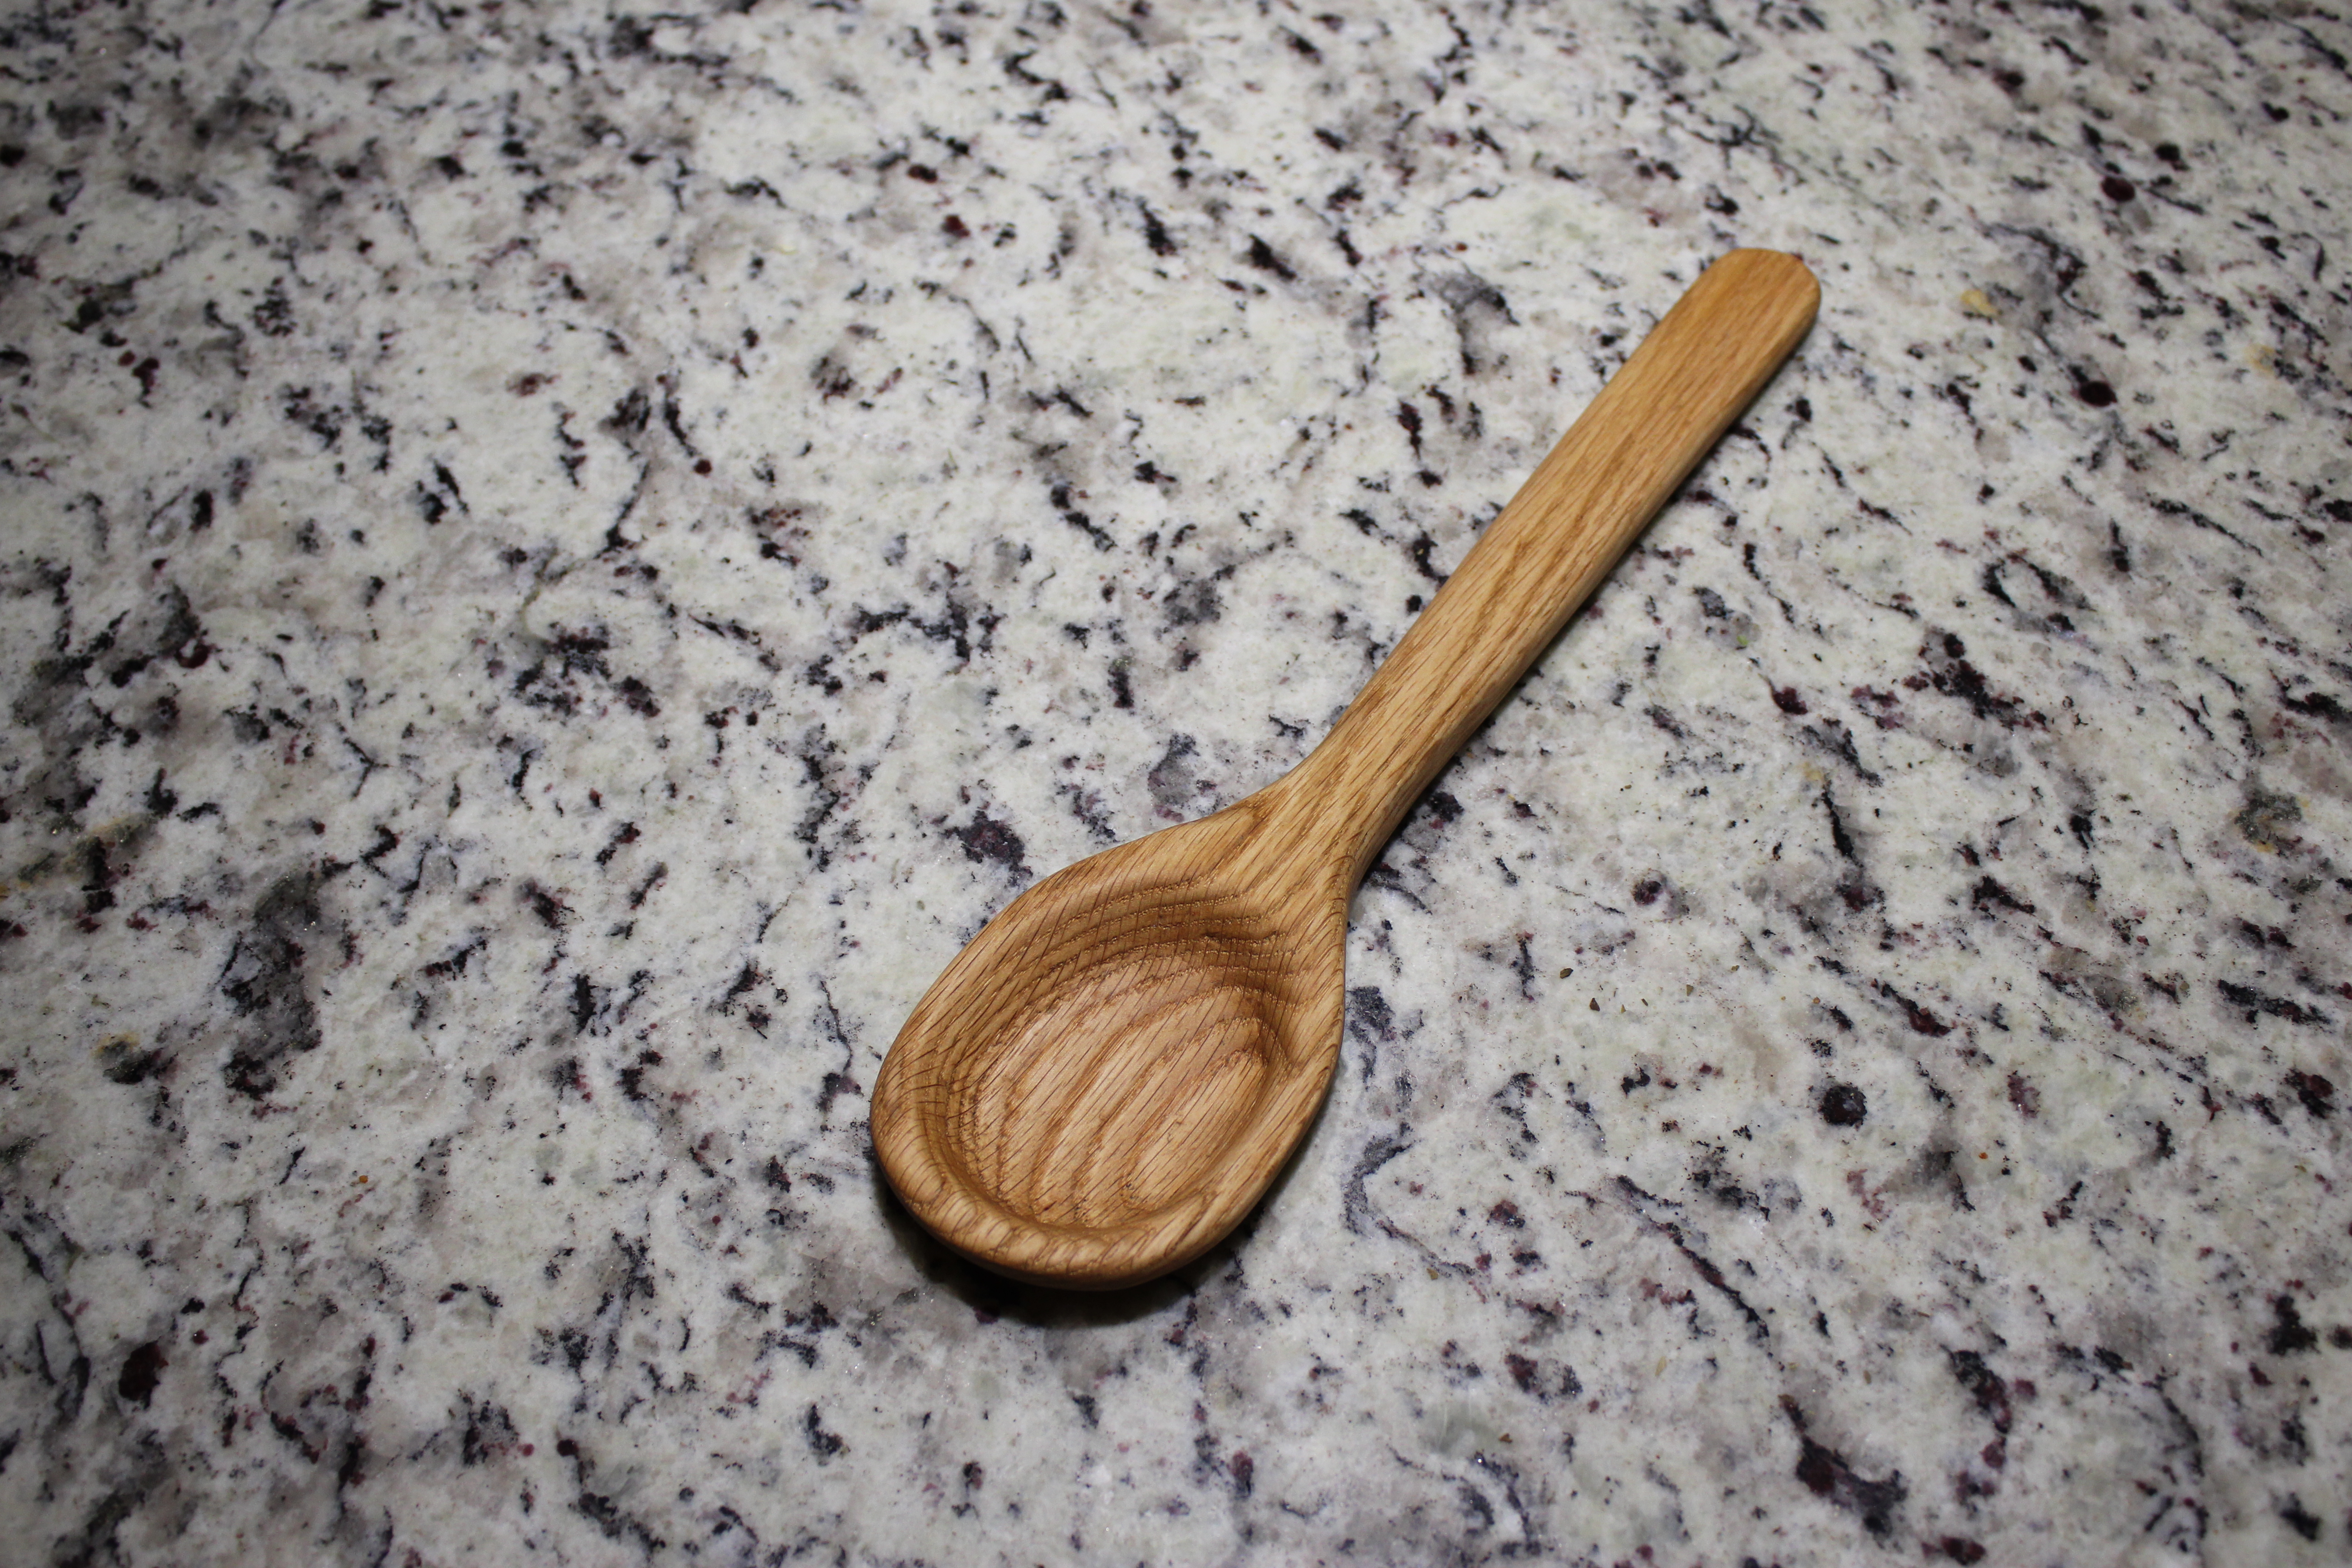 Completely carved wooden spoon